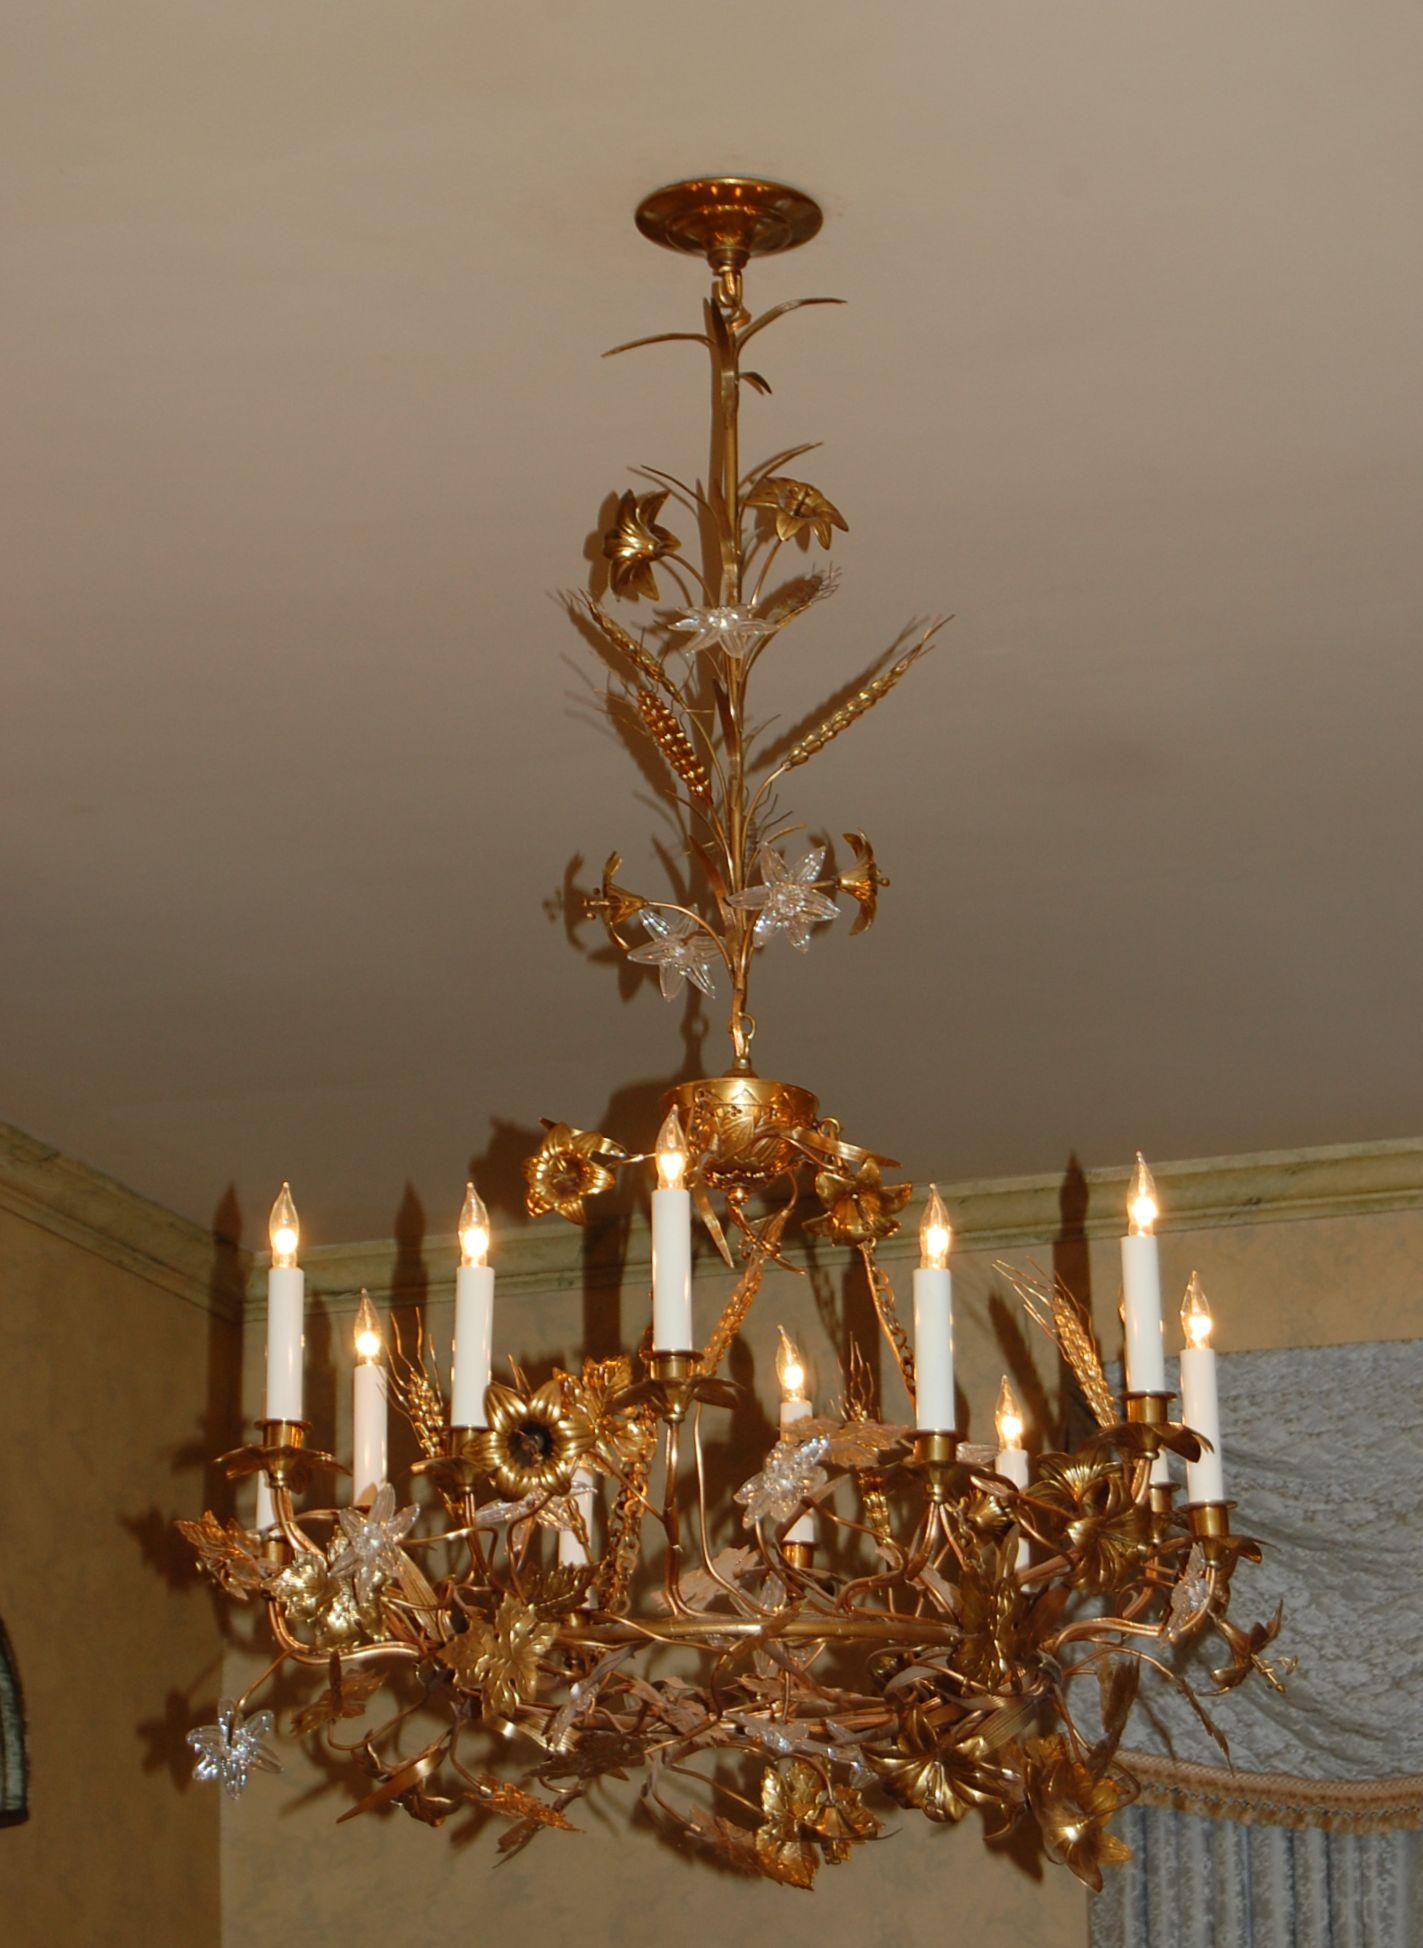 Gilt Brass Chandelier with Clusters of Brass Grapes, Leaves and Sheaths of Wheat 13